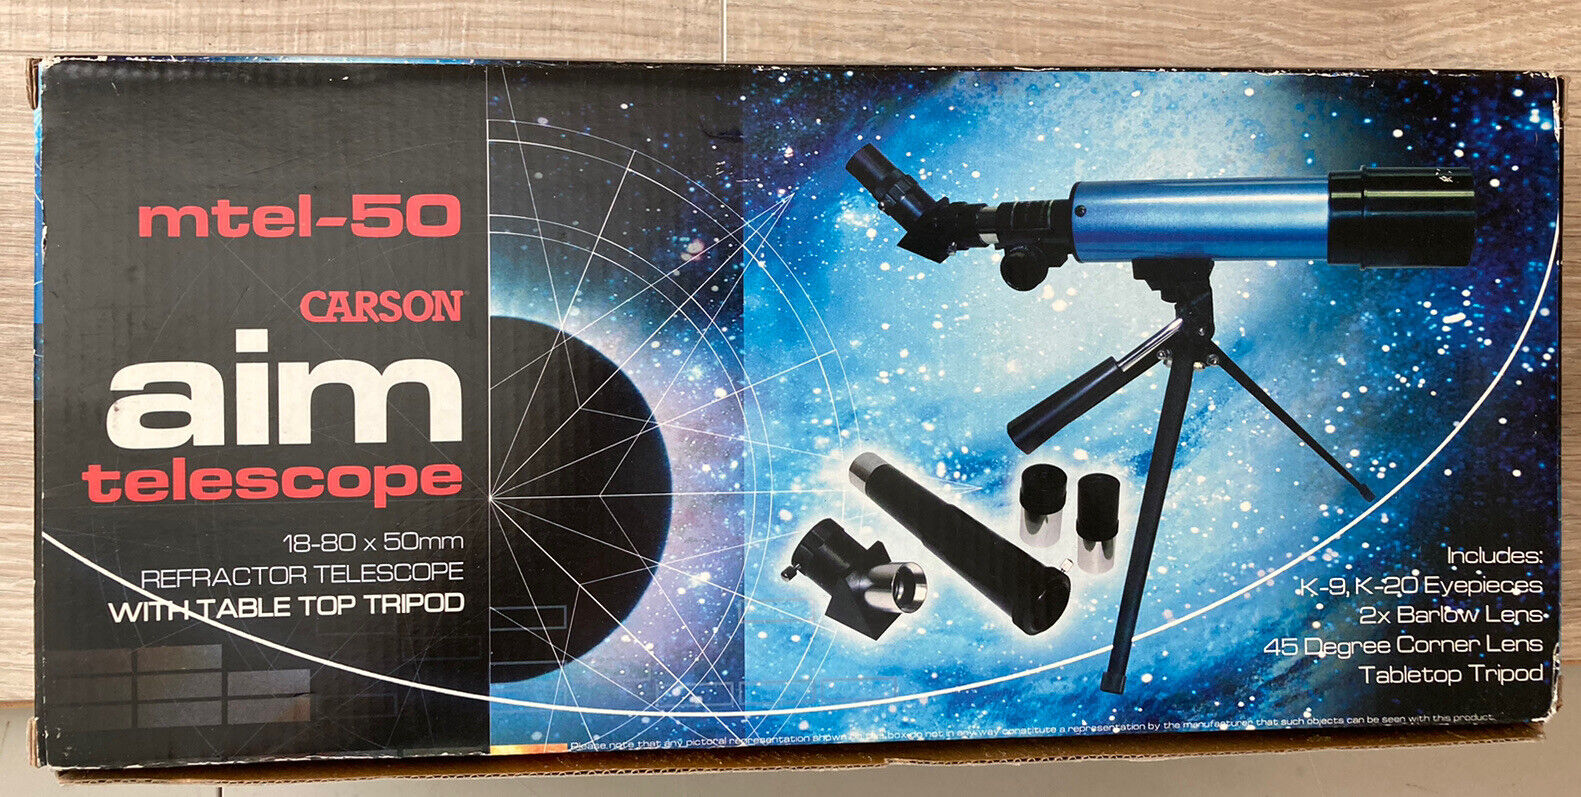 Carson Aim Refractor Type 18x-80x Power Telescope with Tabletop Tripod (MTEL-50)